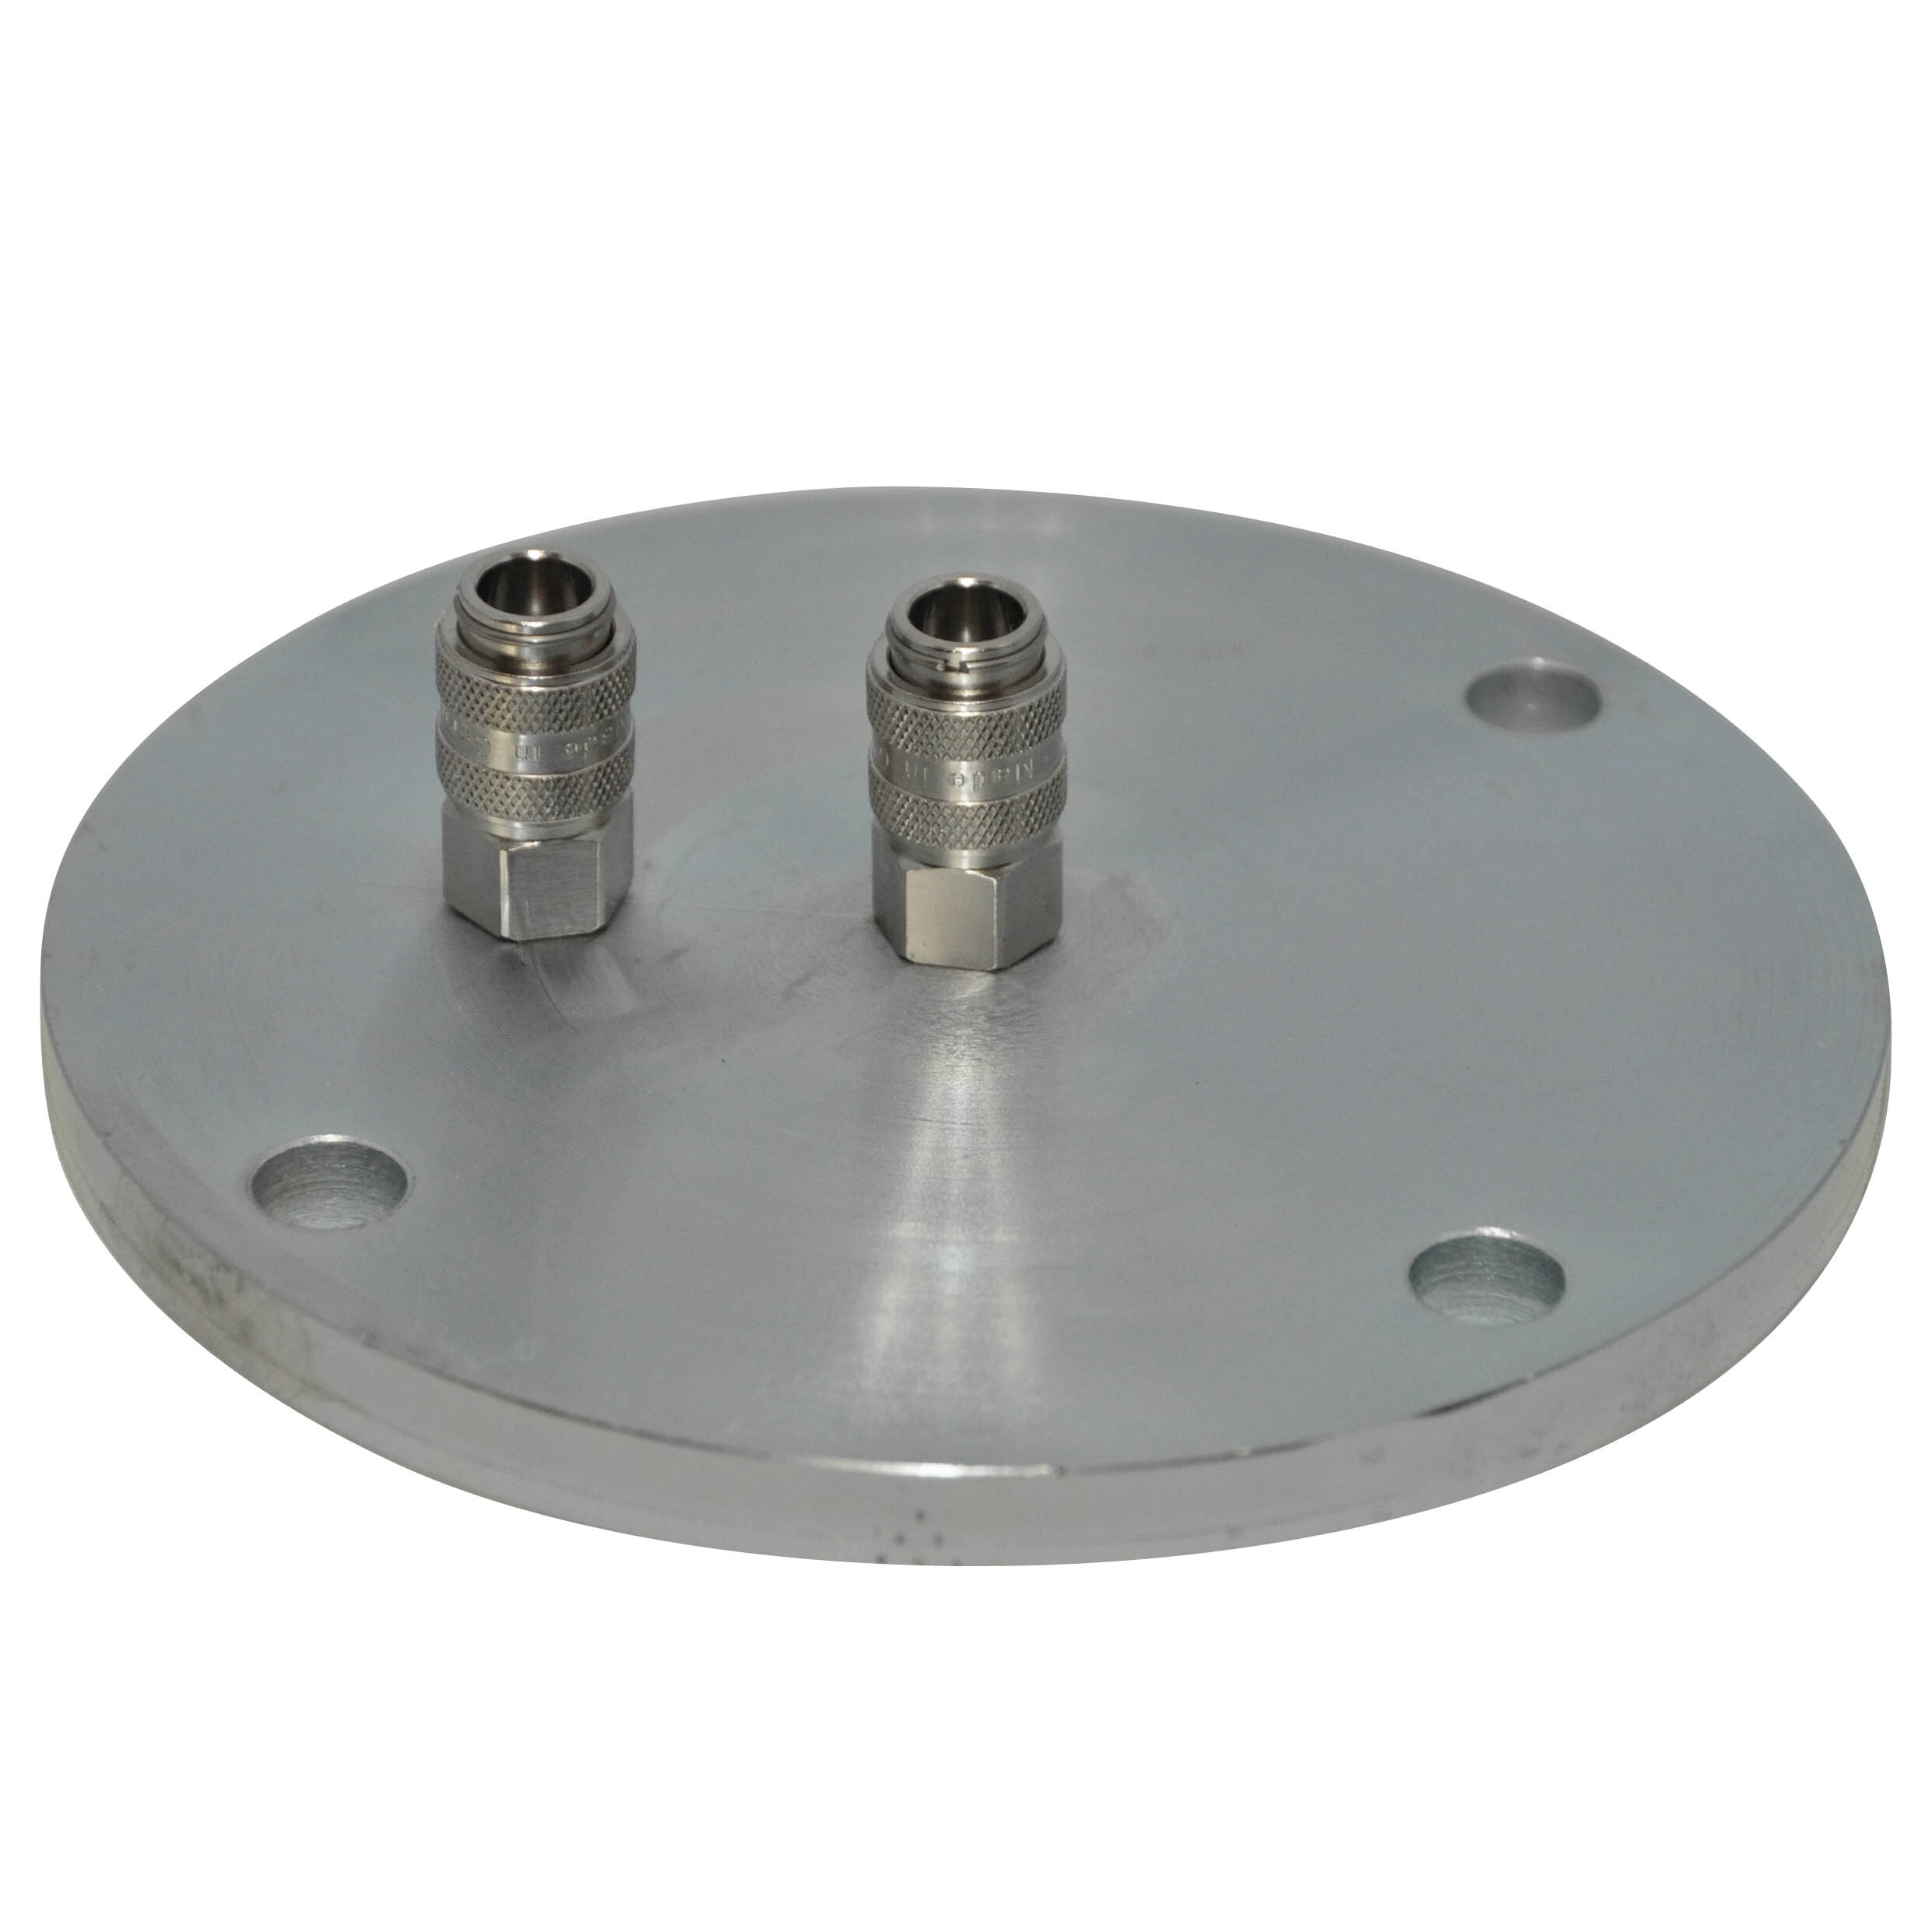 Flange disc with 2x measuring coupling